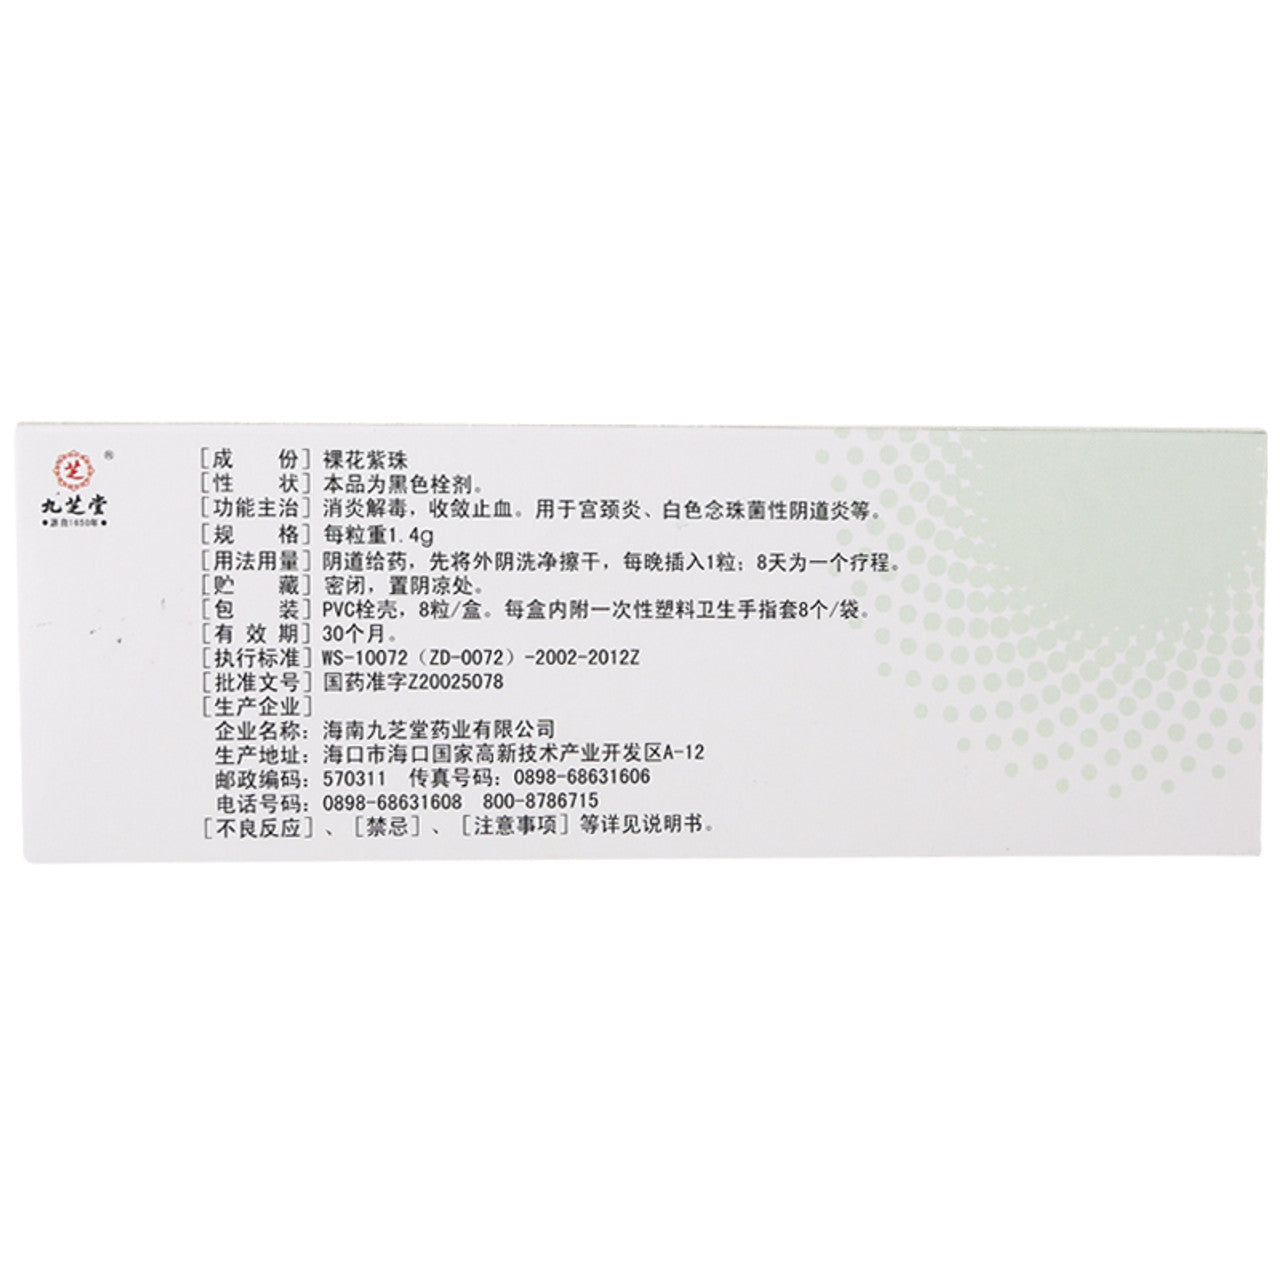 China Herb Suppository. Jiuzhitang Luohuazizhu Shuan / Luohuazizhu Suppository / Luo Hua Zi Zhu Shuan / Nude Flower Purple Beads Suppository for cervicitis, Candida albicans vaginitis